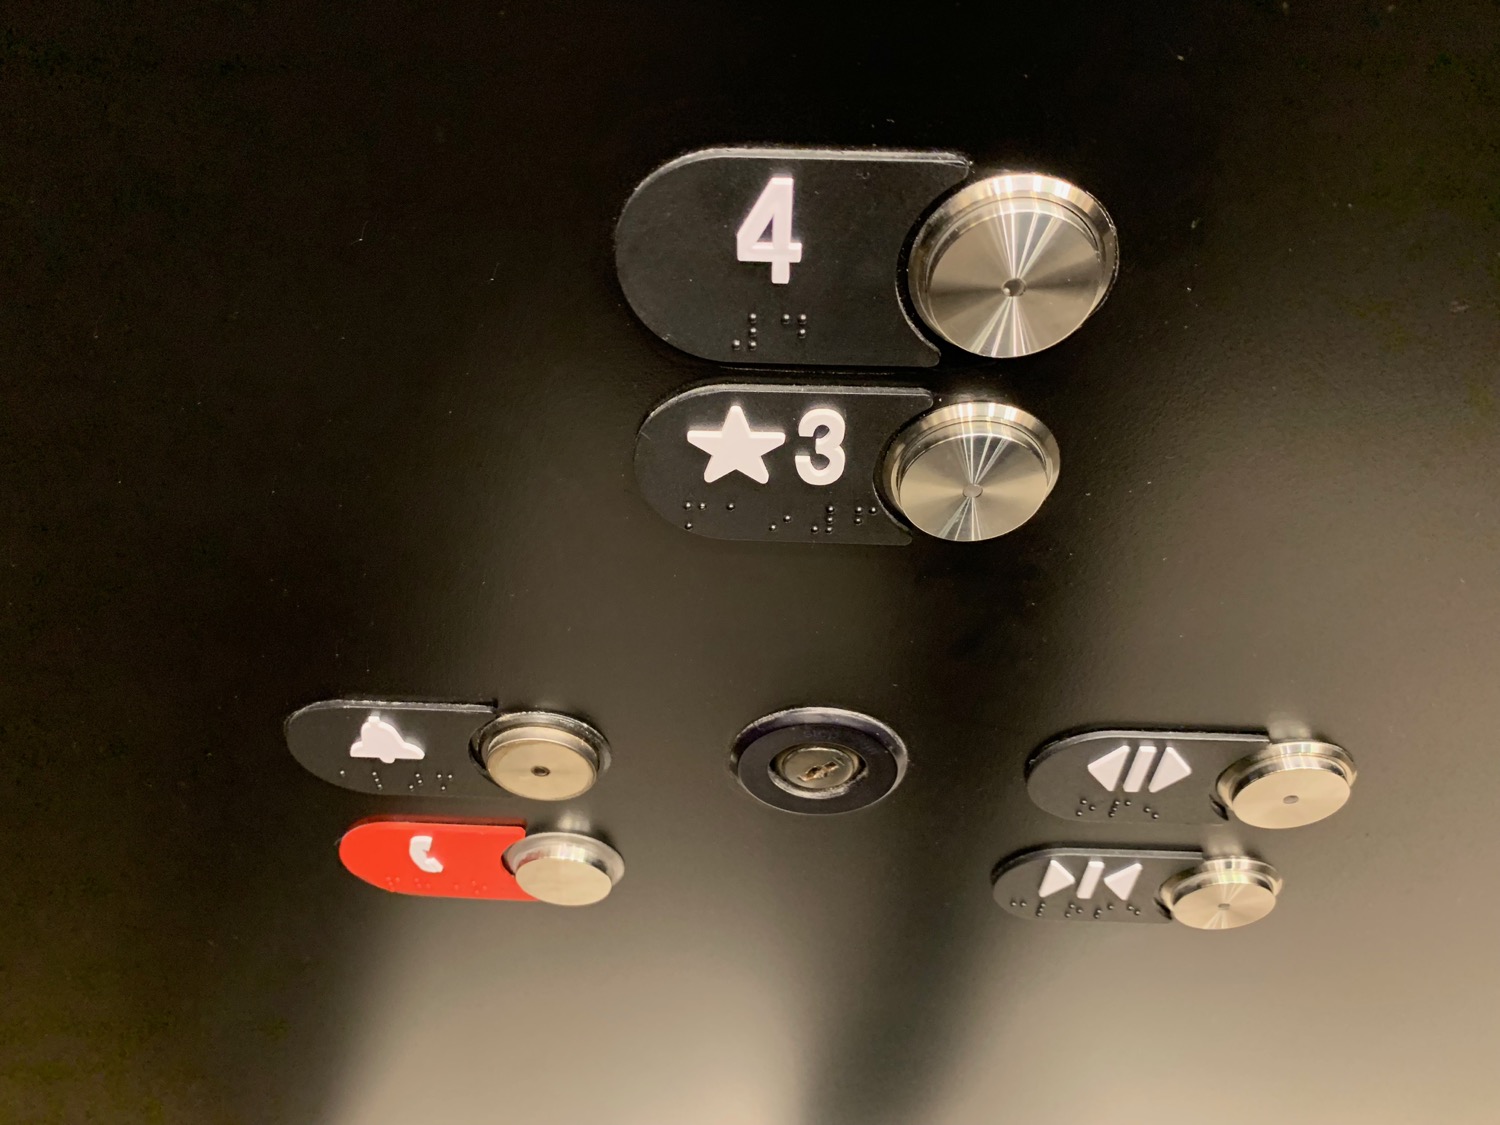 buttons on a black surface